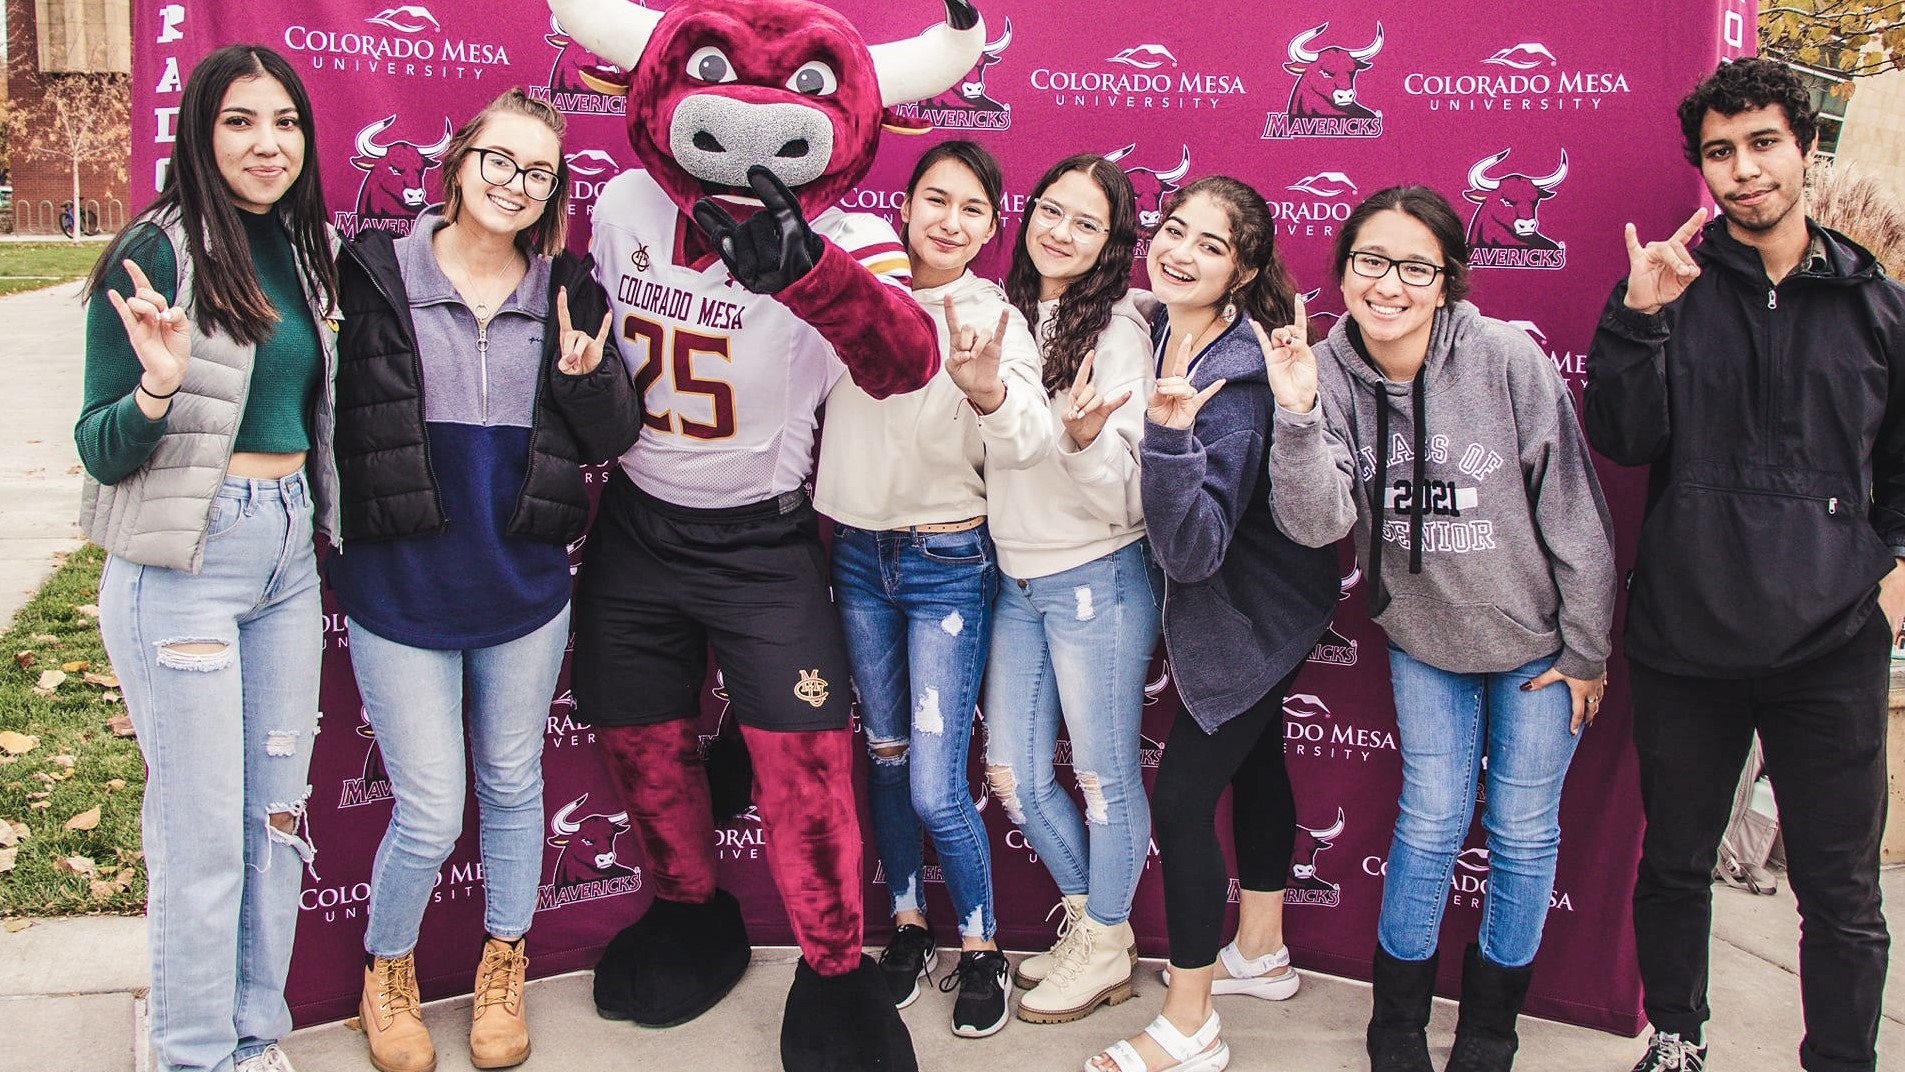 Almost half of the CMU student body is comprised of first generation college students